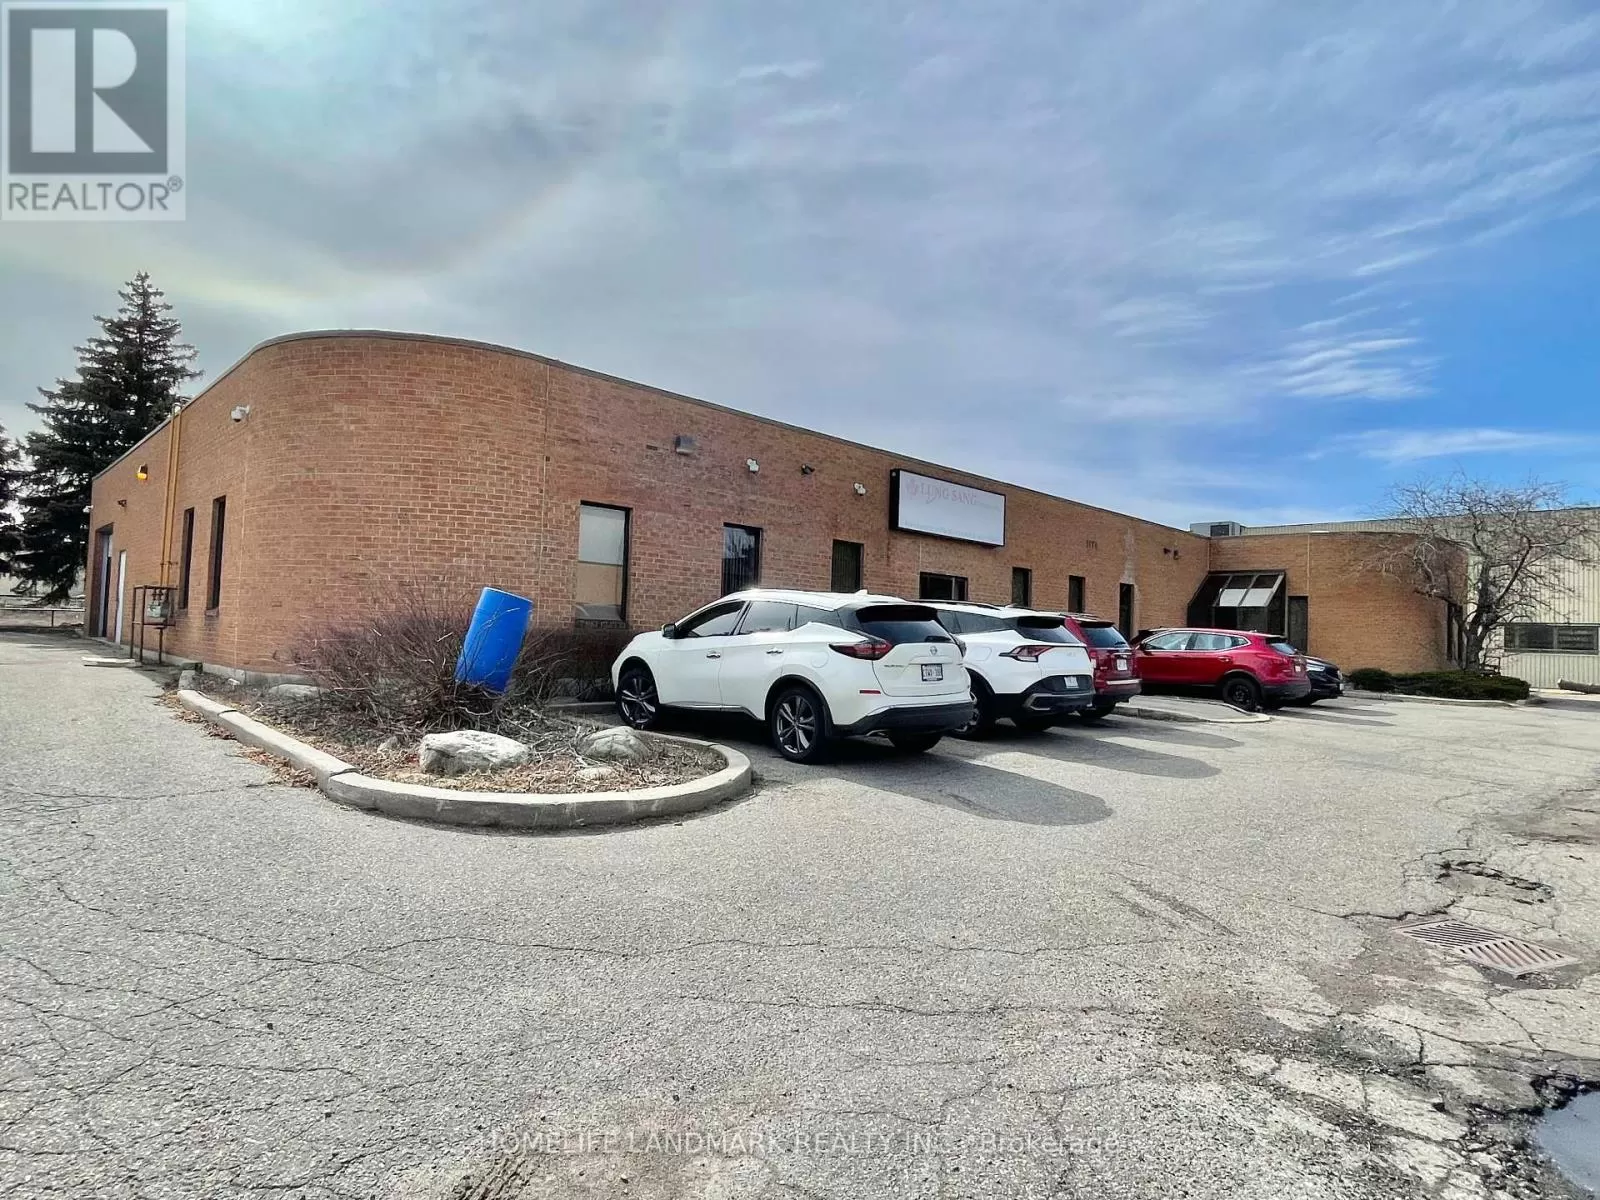 Warehouse for rent: 2174 Torquay Mews, Mississauga, Ontario L5N 2M6